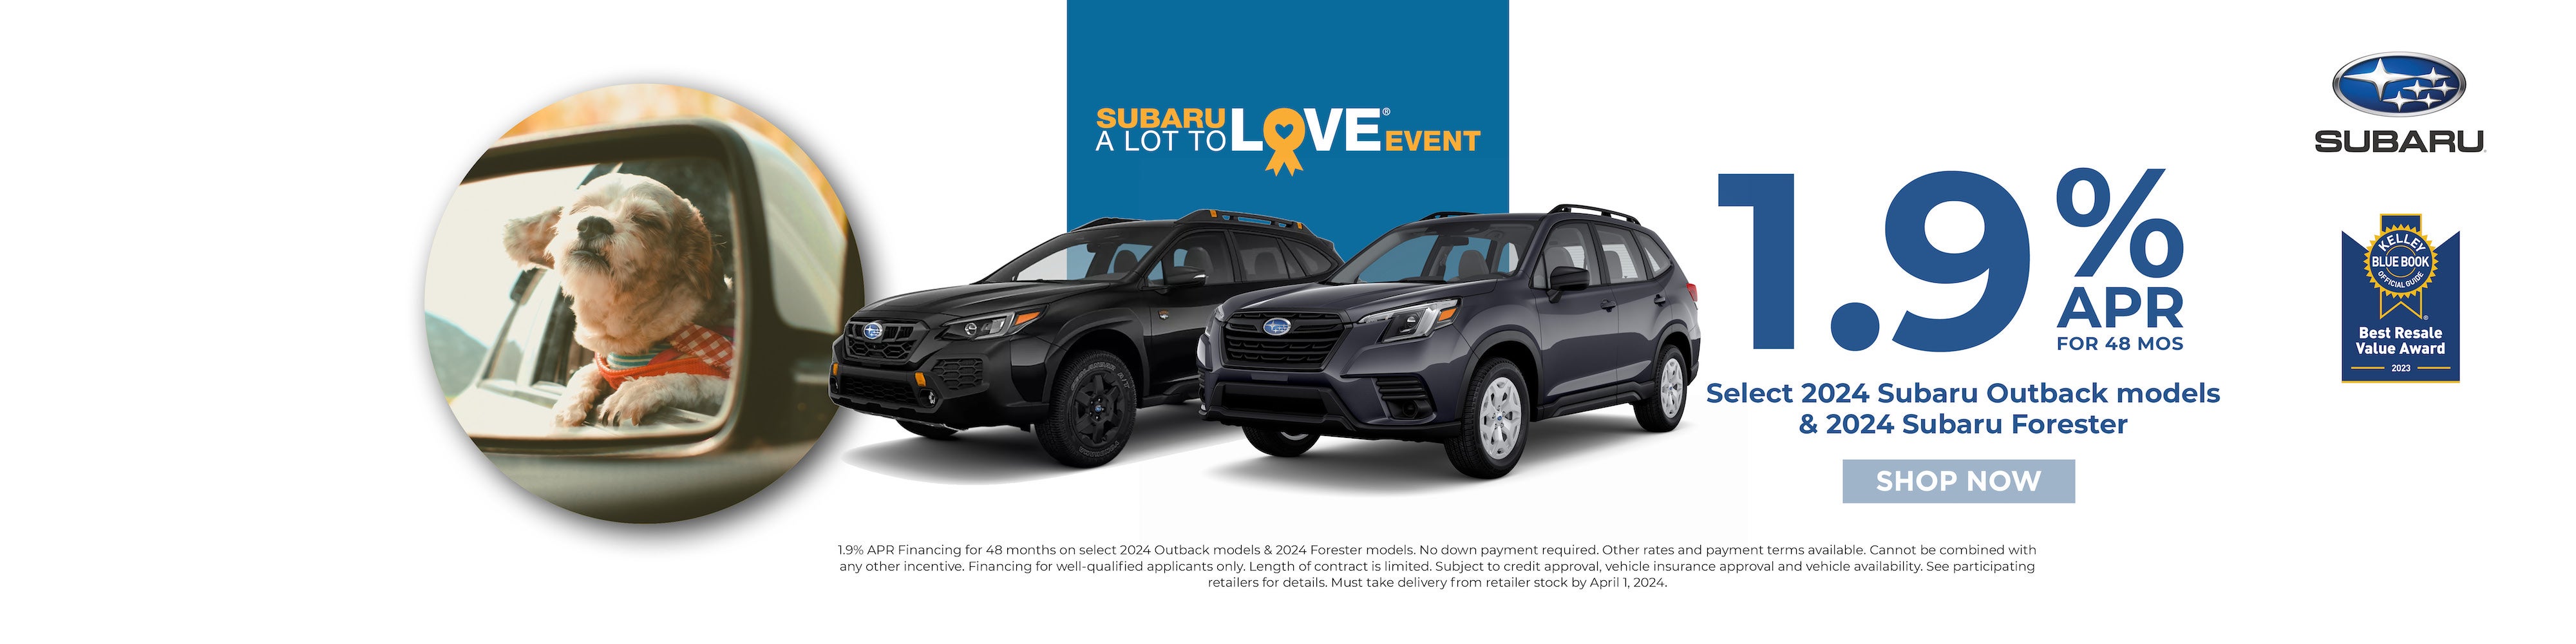 1.9% APR on Outback & Forester